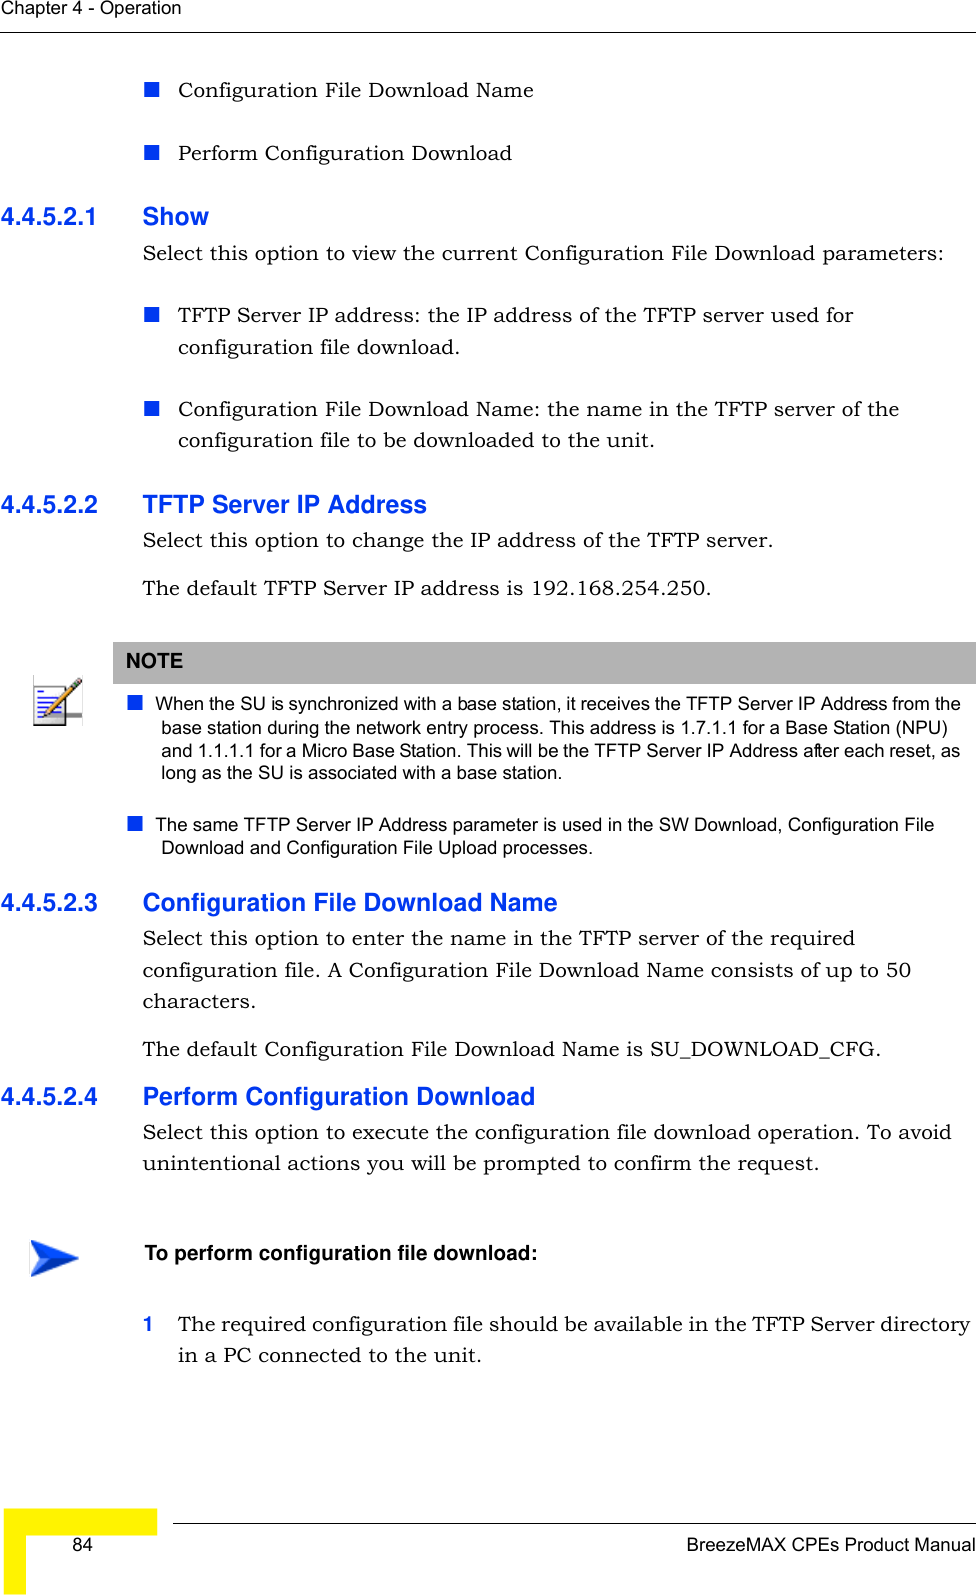  84 BreezeMAX CPEs Product ManualChapter 4 - OperationConfiguration File Download NamePerform Configuration Download4.4.5.2.1 Show Select this option to view the current Configuration File Download parameters:TFTP Server IP address: the IP address of the TFTP server used for configuration file download.Configuration File Download Name: the name in the TFTP server of the configuration file to be downloaded to the unit.4.4.5.2.2 TFTP Server IP AddressSelect this option to change the IP address of the TFTP server.The default TFTP Server IP address is 192.168.254.250.4.4.5.2.3 Configuration File Download NameSelect this option to enter the name in the TFTP server of the required configuration file. A Configuration File Download Name consists of up to 50 characters.The default Configuration File Download Name is SU_DOWNLOAD_CFG.4.4.5.2.4 Perform Configuration DownloadSelect this option to execute the configuration file download operation. To avoid unintentional actions you will be prompted to confirm the request.1The required configuration file should be available in the TFTP Server directory in a PC connected to the unit. NOTEWhen the SU is synchronized with a base station, it receives the TFTP Server IP Address from the base station during the network entry process. This address is 1.7.1.1 for a Base Station (NPU) and 1.1.1.1 for a Micro Base Station. This will be the TFTP Server IP Address after each reset, as long as the SU is associated with a base station.The same TFTP Server IP Address parameter is used in the SW Download, Configuration File Download and Configuration File Upload processes. To perform configuration file download: